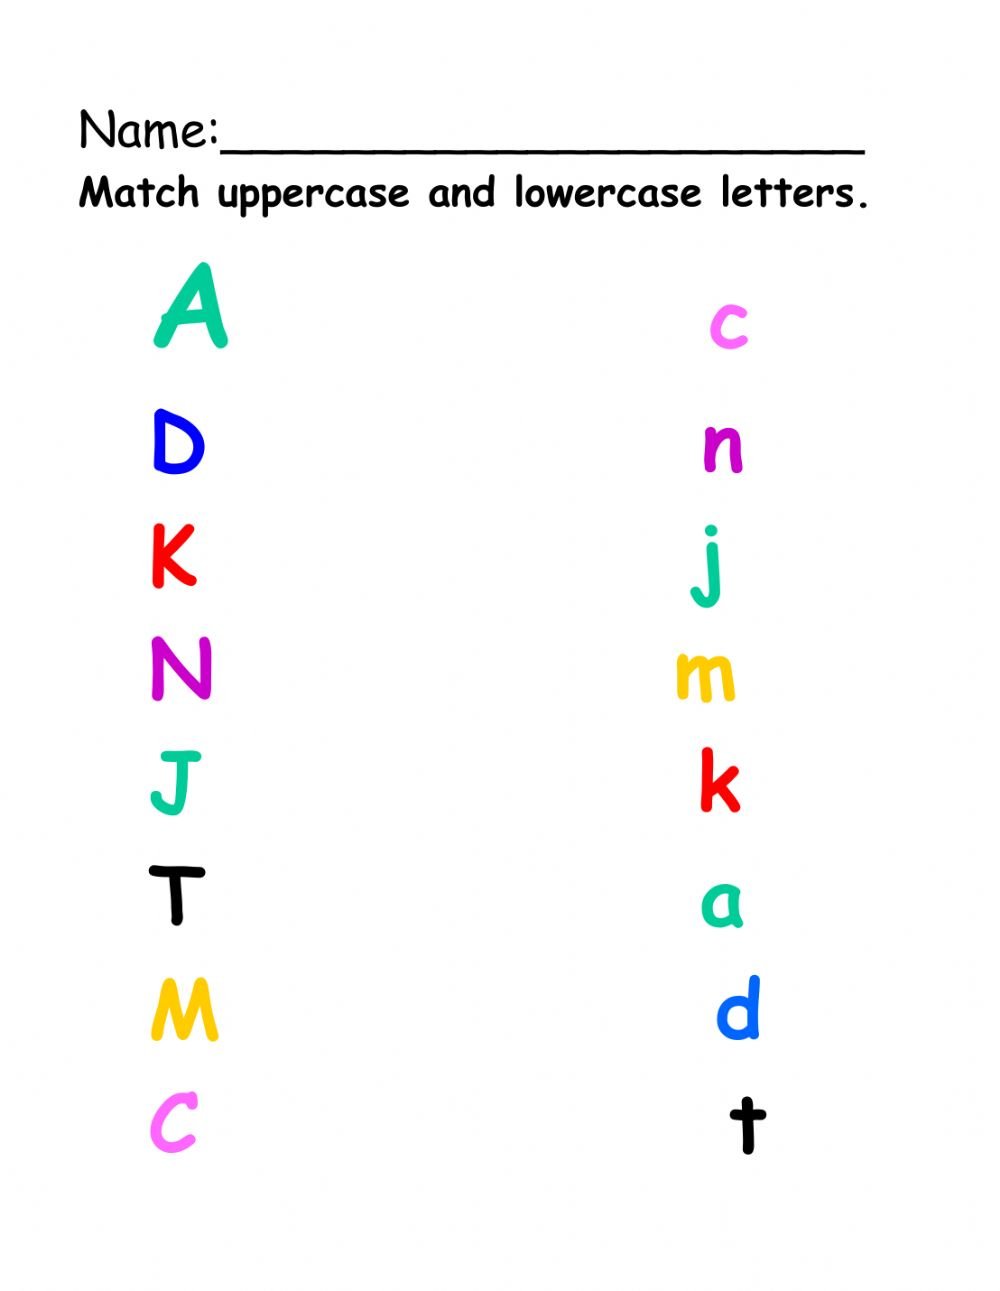 Match Uppercase and Lowercase Letters worksheet